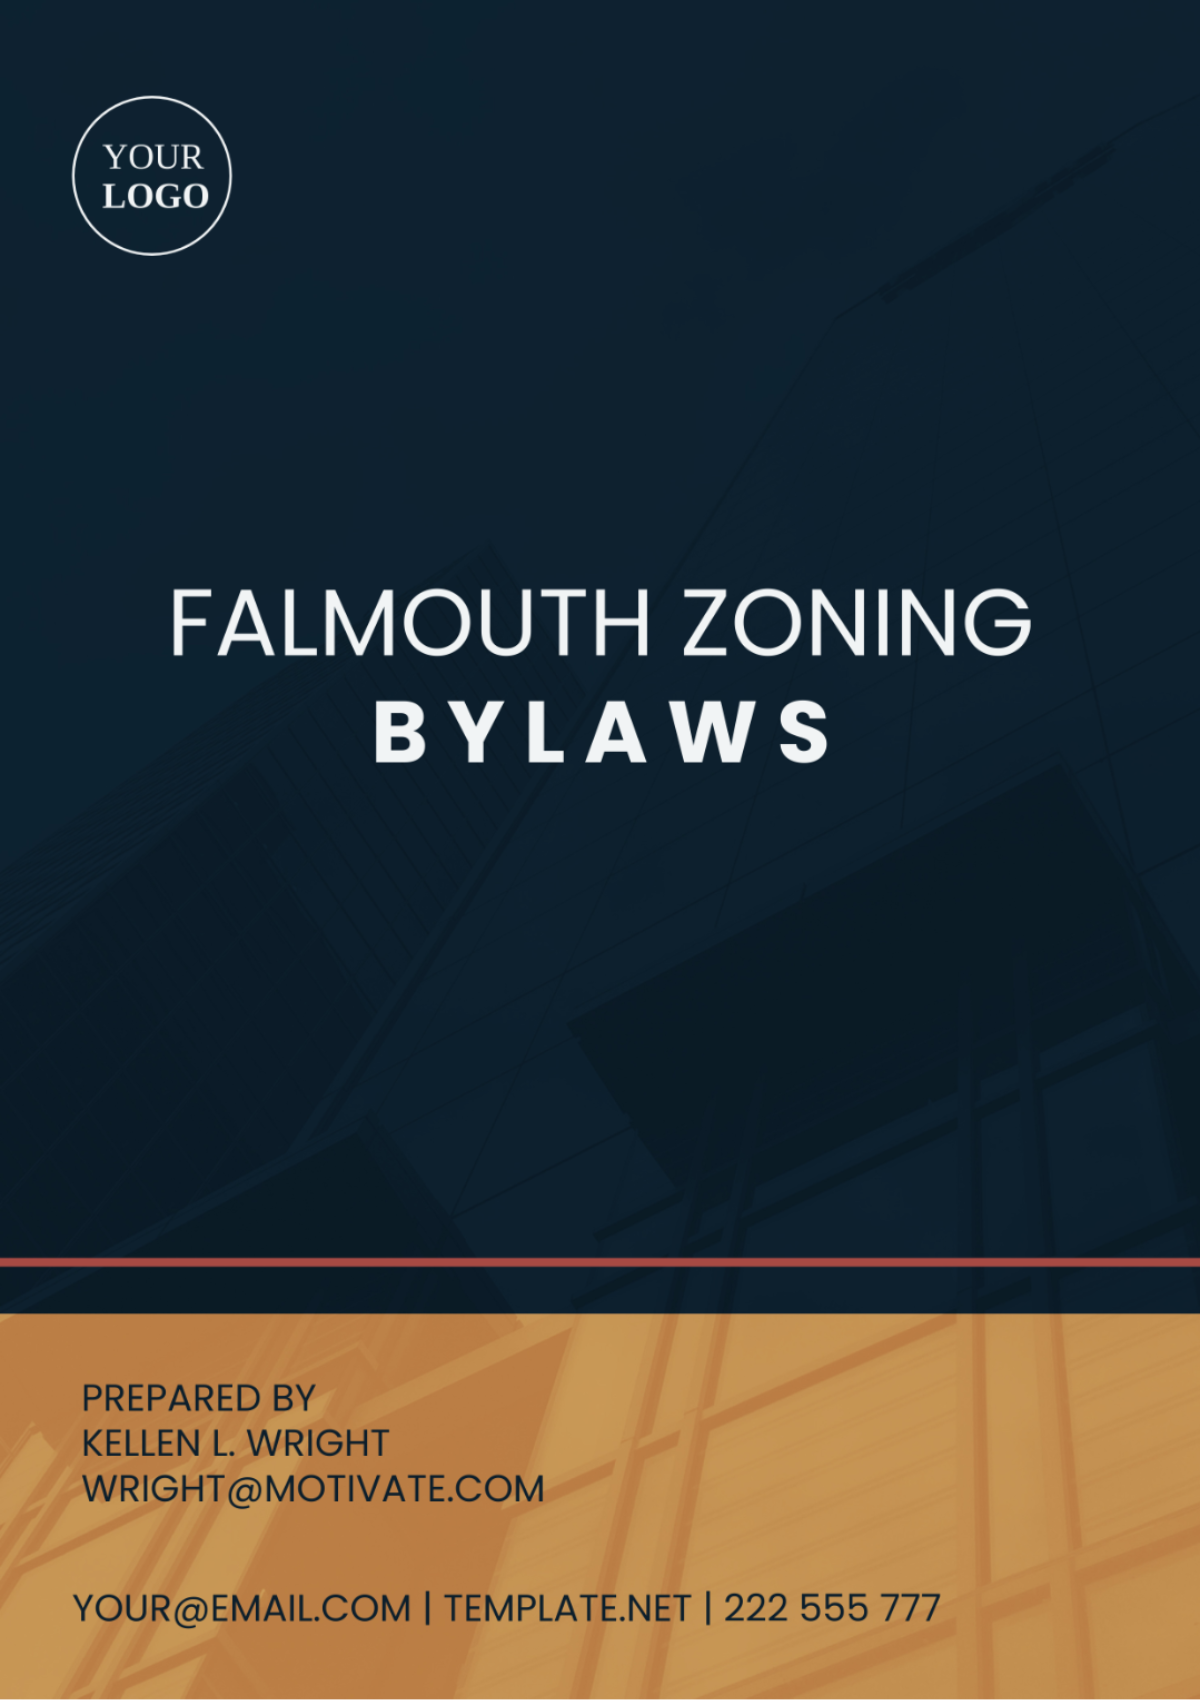 Falmouth Zoning Bylaws Template